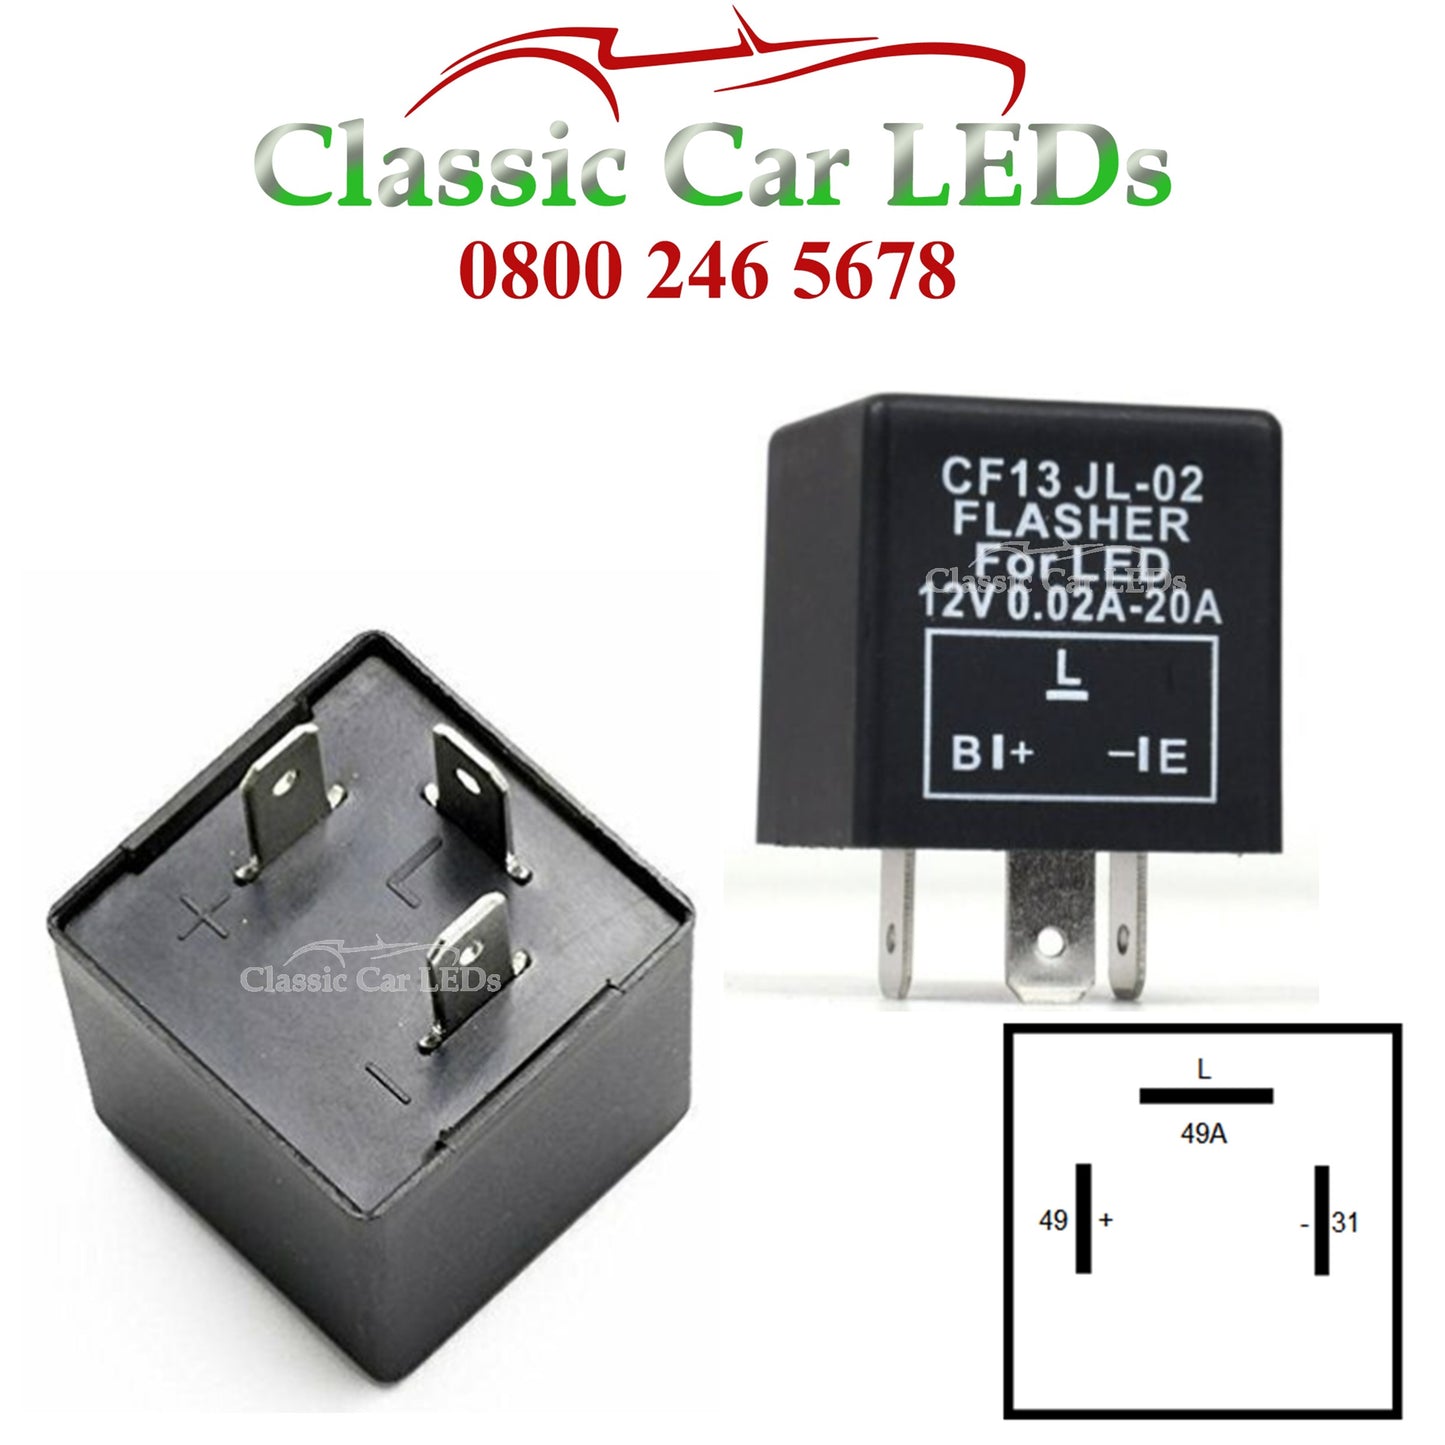 12 VOLT CF13 ELECTRONIC INDICATOR / FLASHER RELAY WITH OE CLICKING SOUND - Motorcycle / Japanese Cars